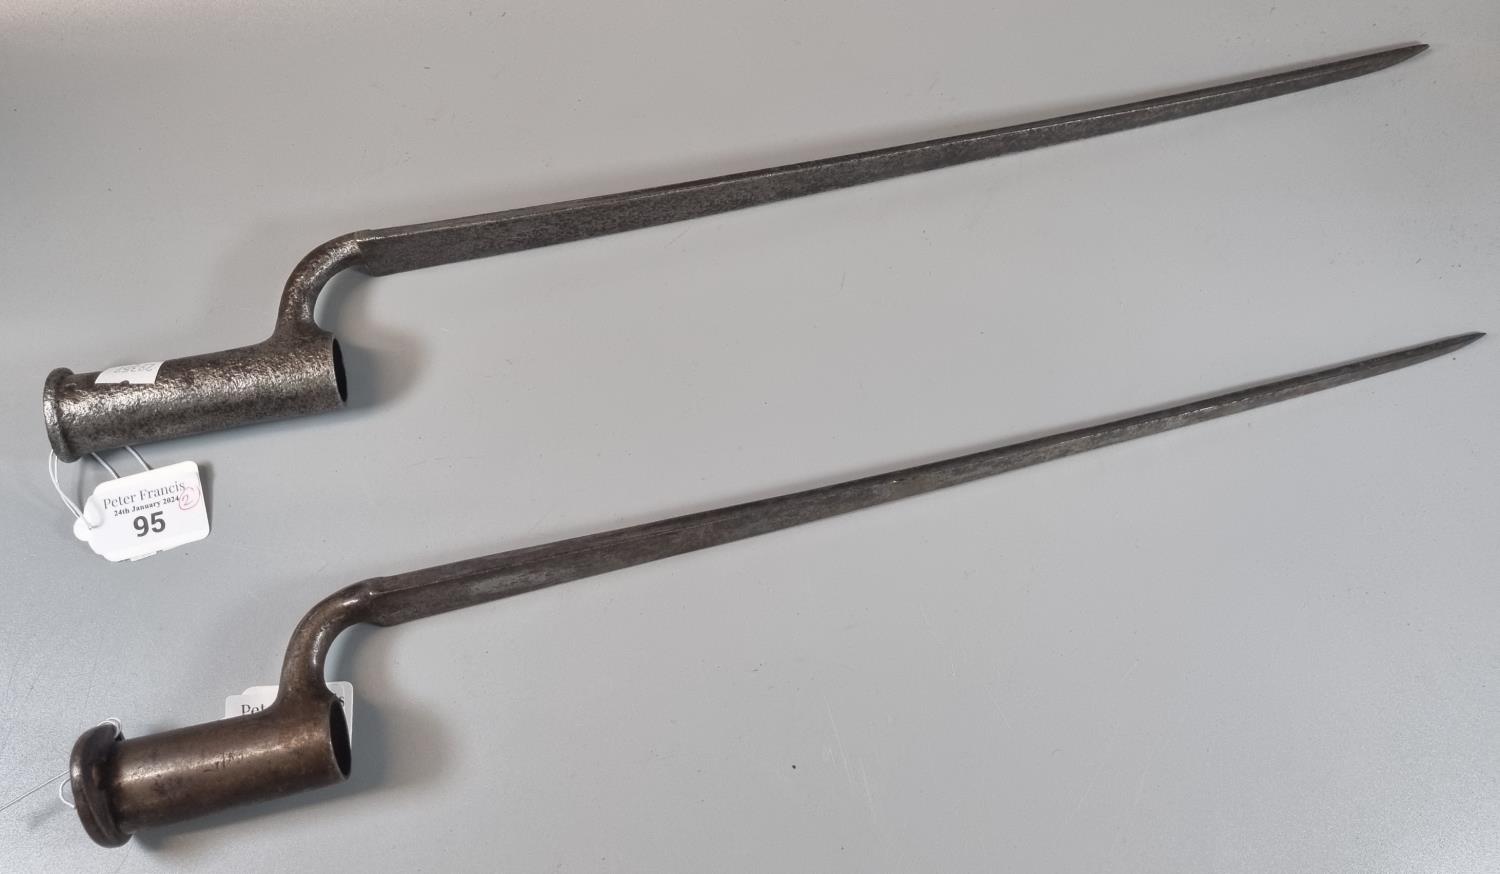 Two similar British 19th century socket bayonets with fluted triangular blades, one in relic